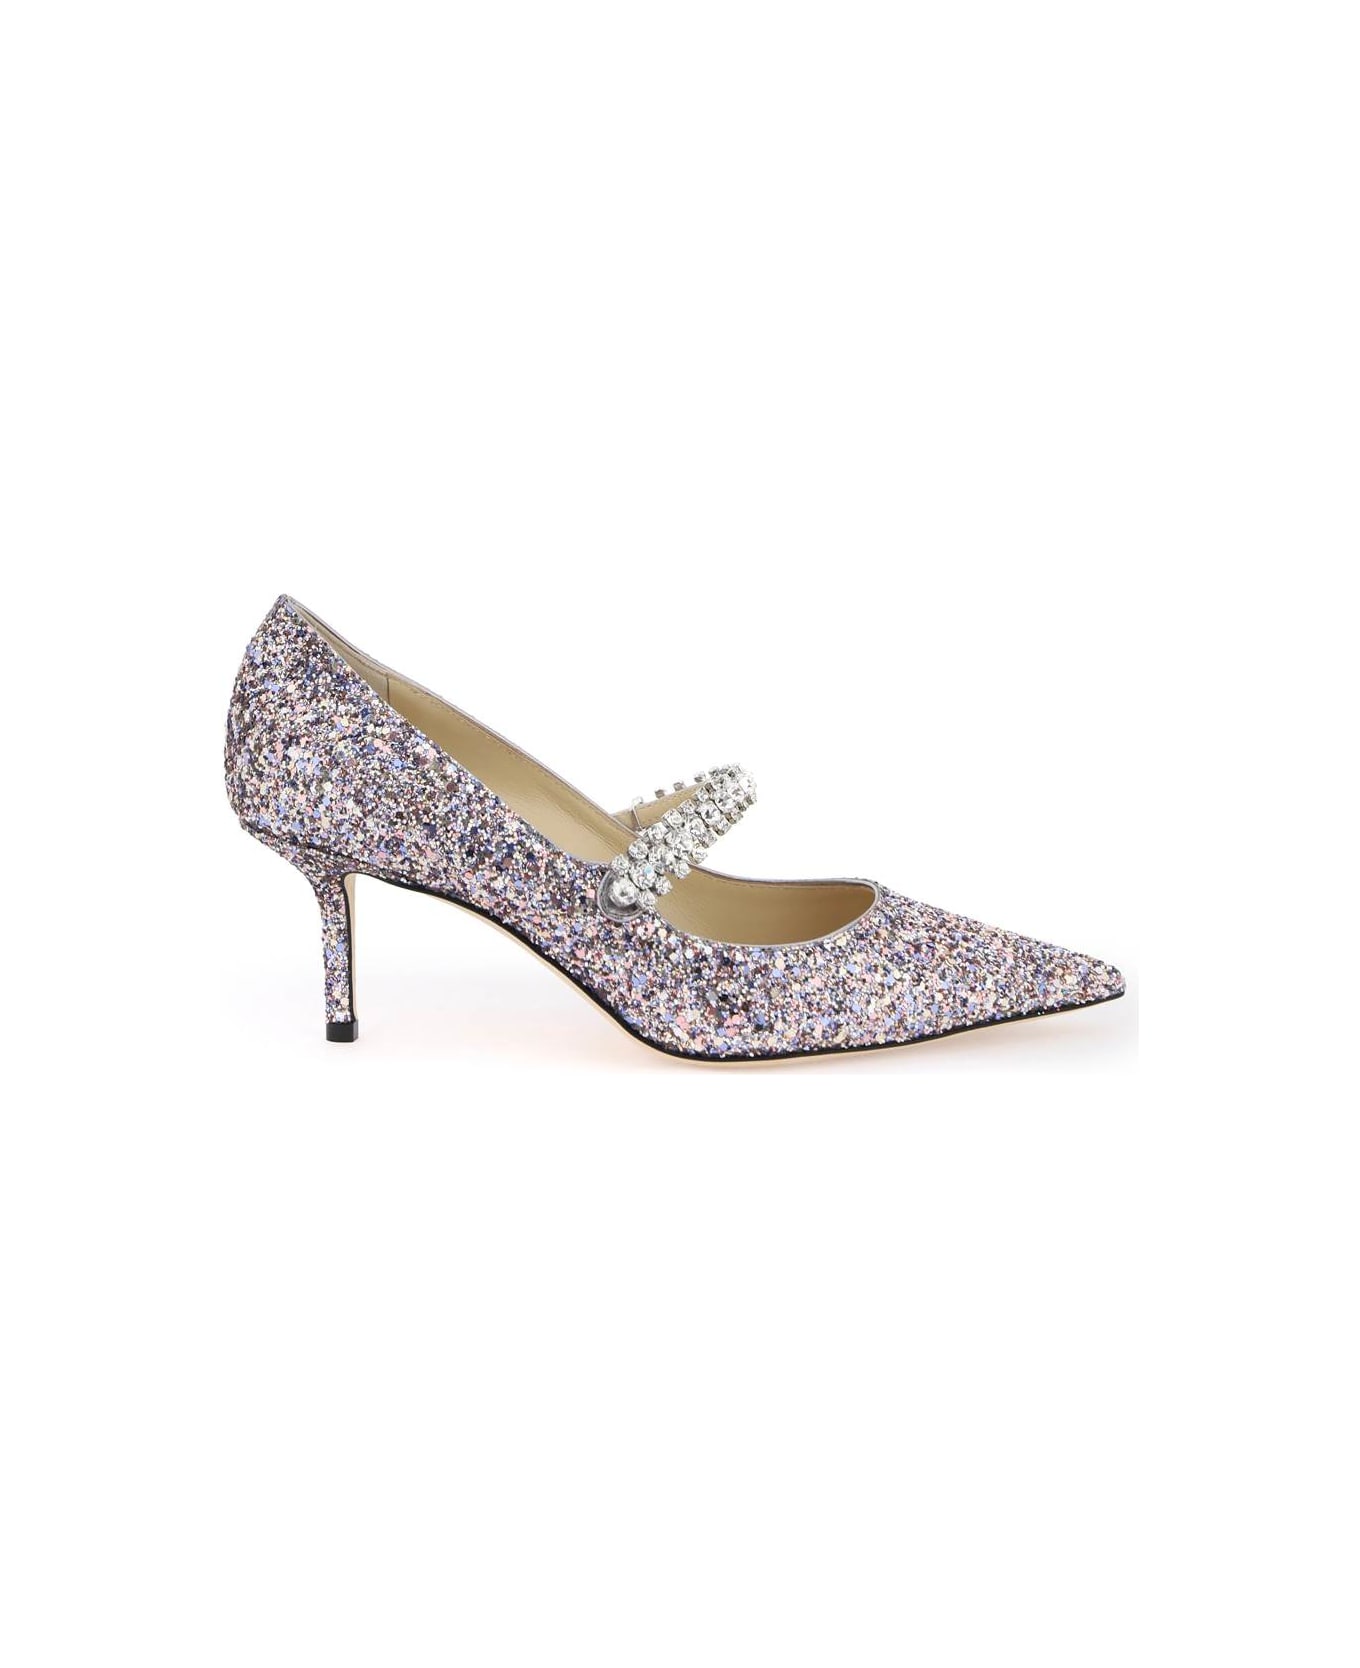 Jimmy Choo Bing 65 Pumps With Glitter And Crystals - SPRINKLE MIX (Pink) ハイヒール